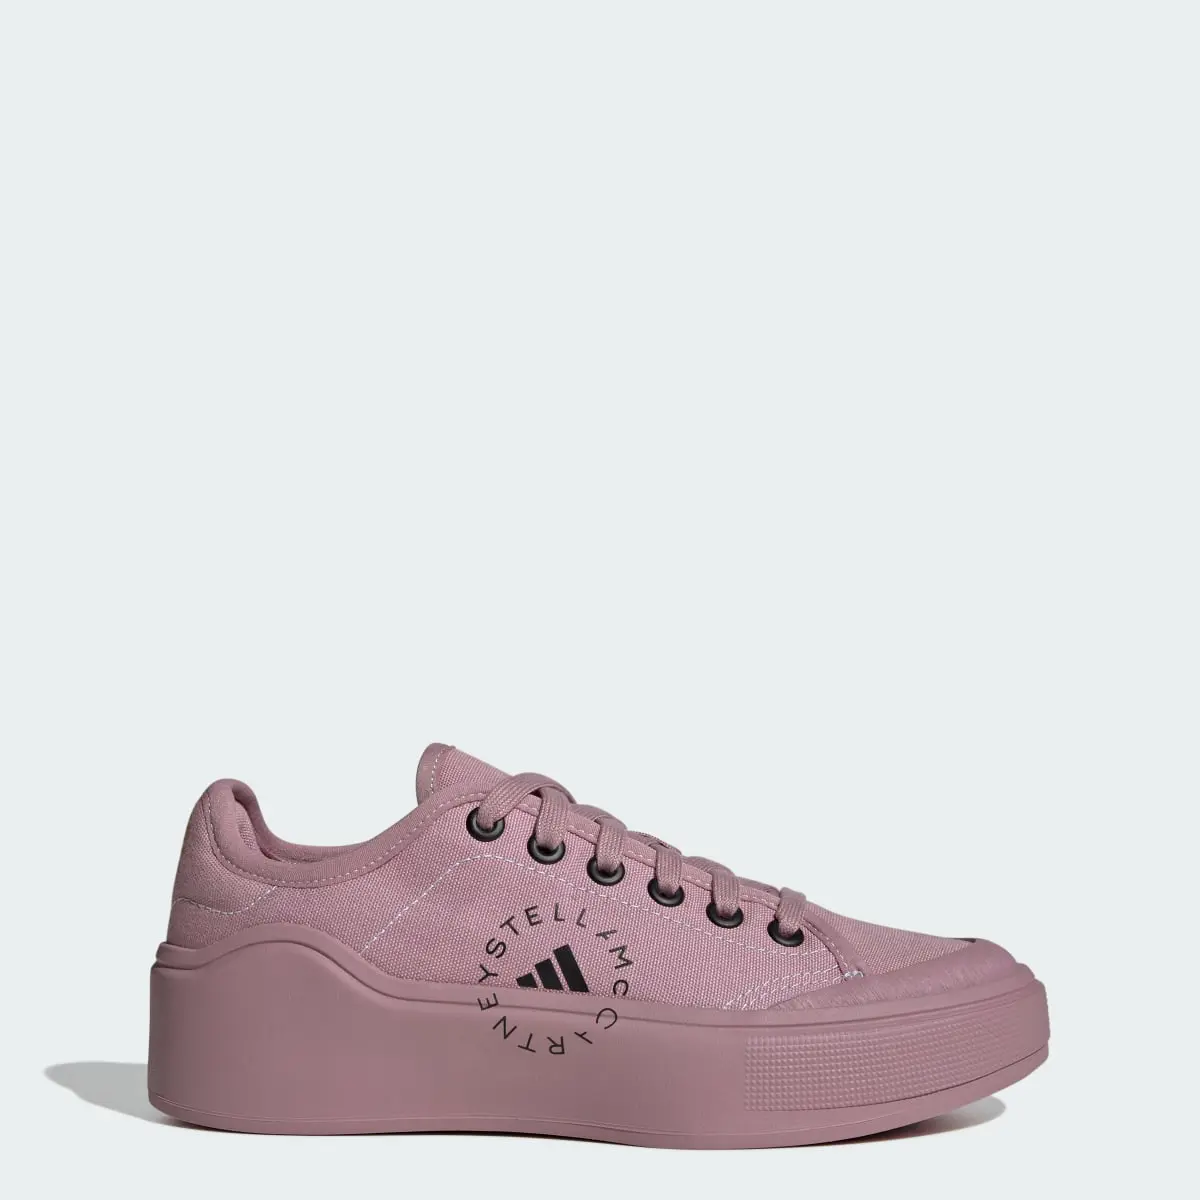 Adidas by Stella McCartney Court Shoes. 1